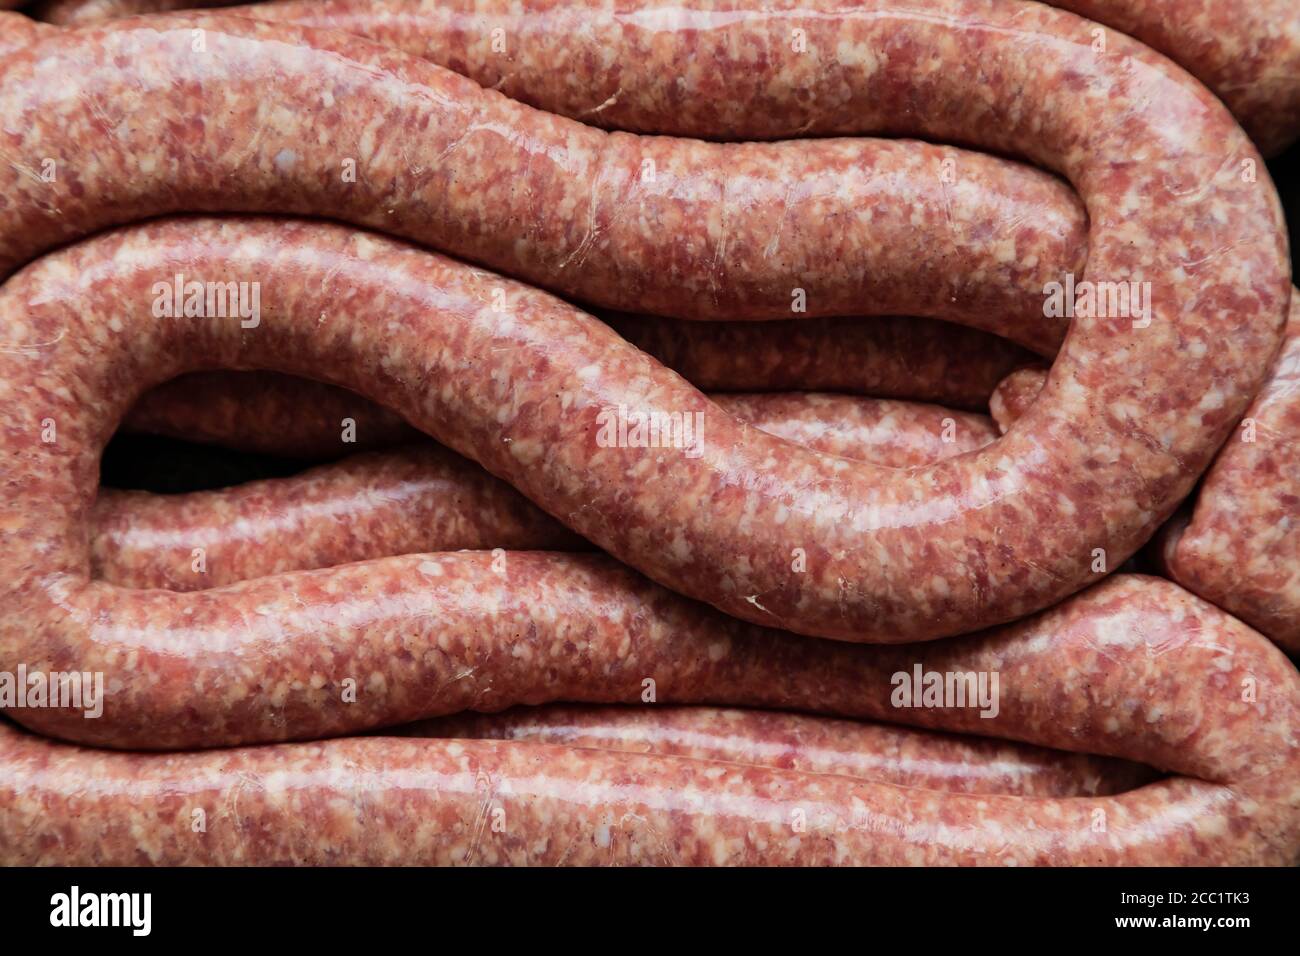 Freshly made traditional Cumberland sausage length. Not usually linked, but served coiled or in lengths. Stock Photo